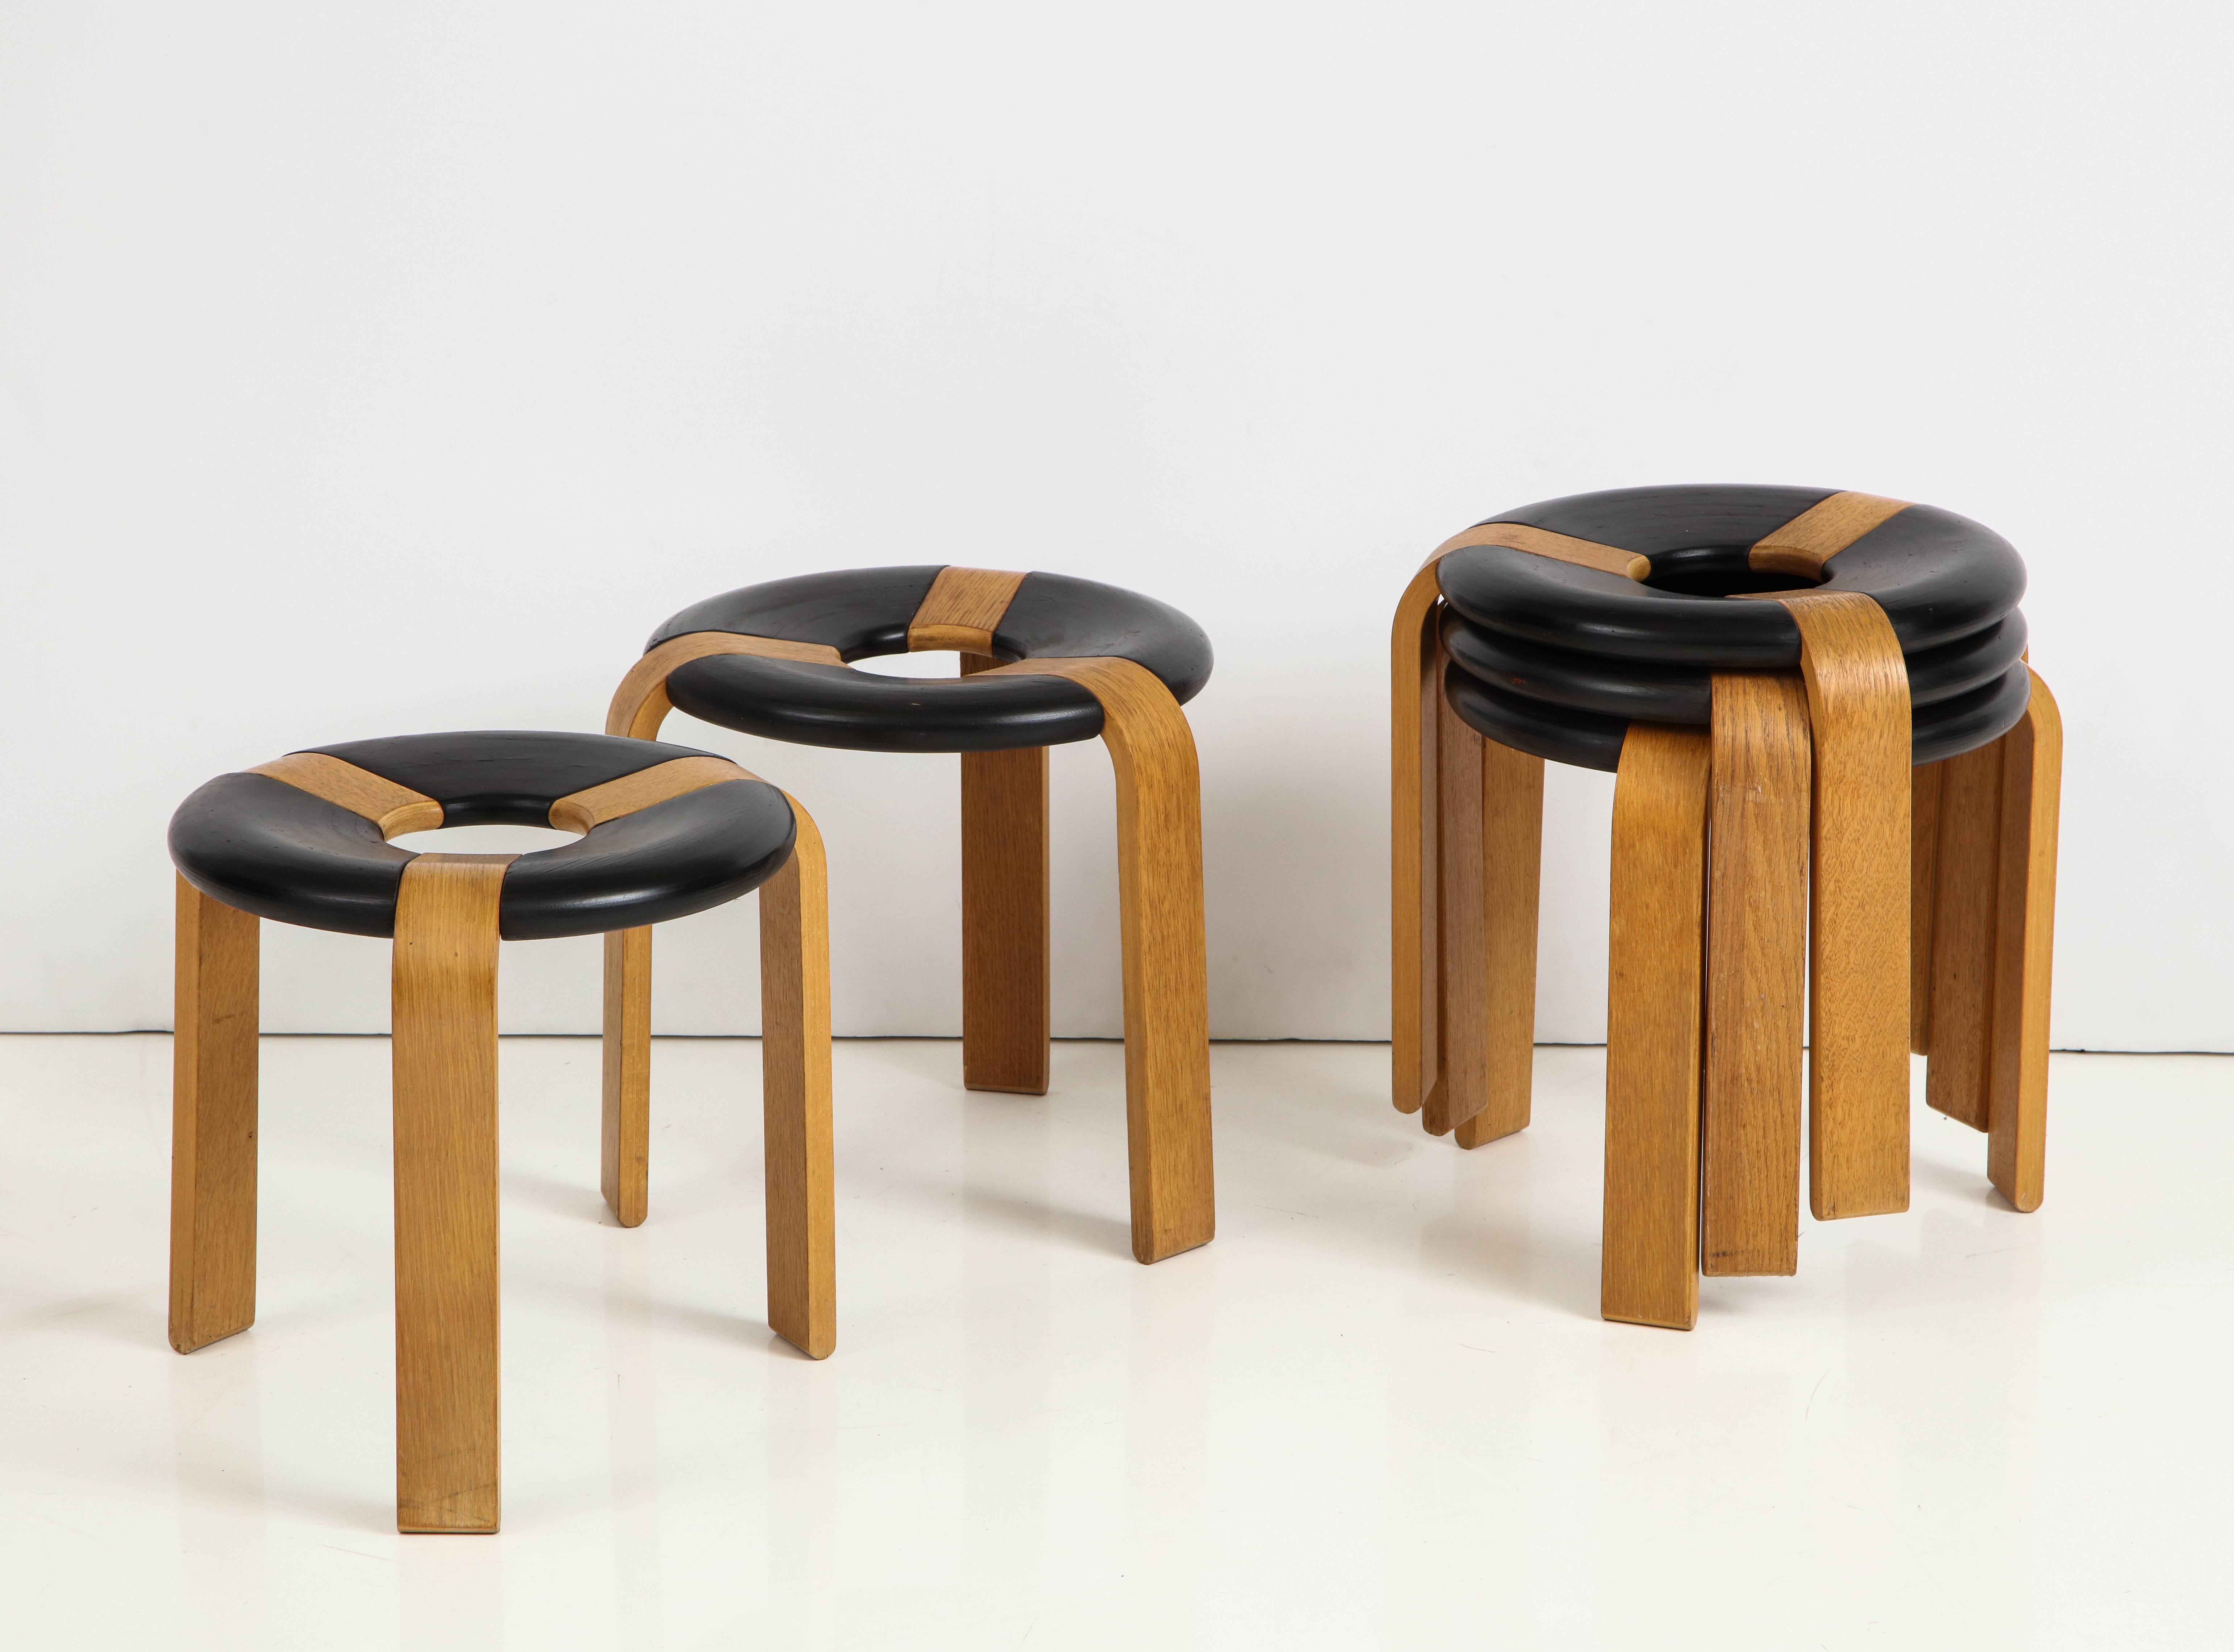 Set of five stacking stools in oak plywood and lacquered plywood. By Rud Thygesen and Johnny Sorensen for Magnus Olesen A/S, Denmark, circa 1970s. A distinctive design wherein the three bent plywood legs culminate at the center of a donut-shaped